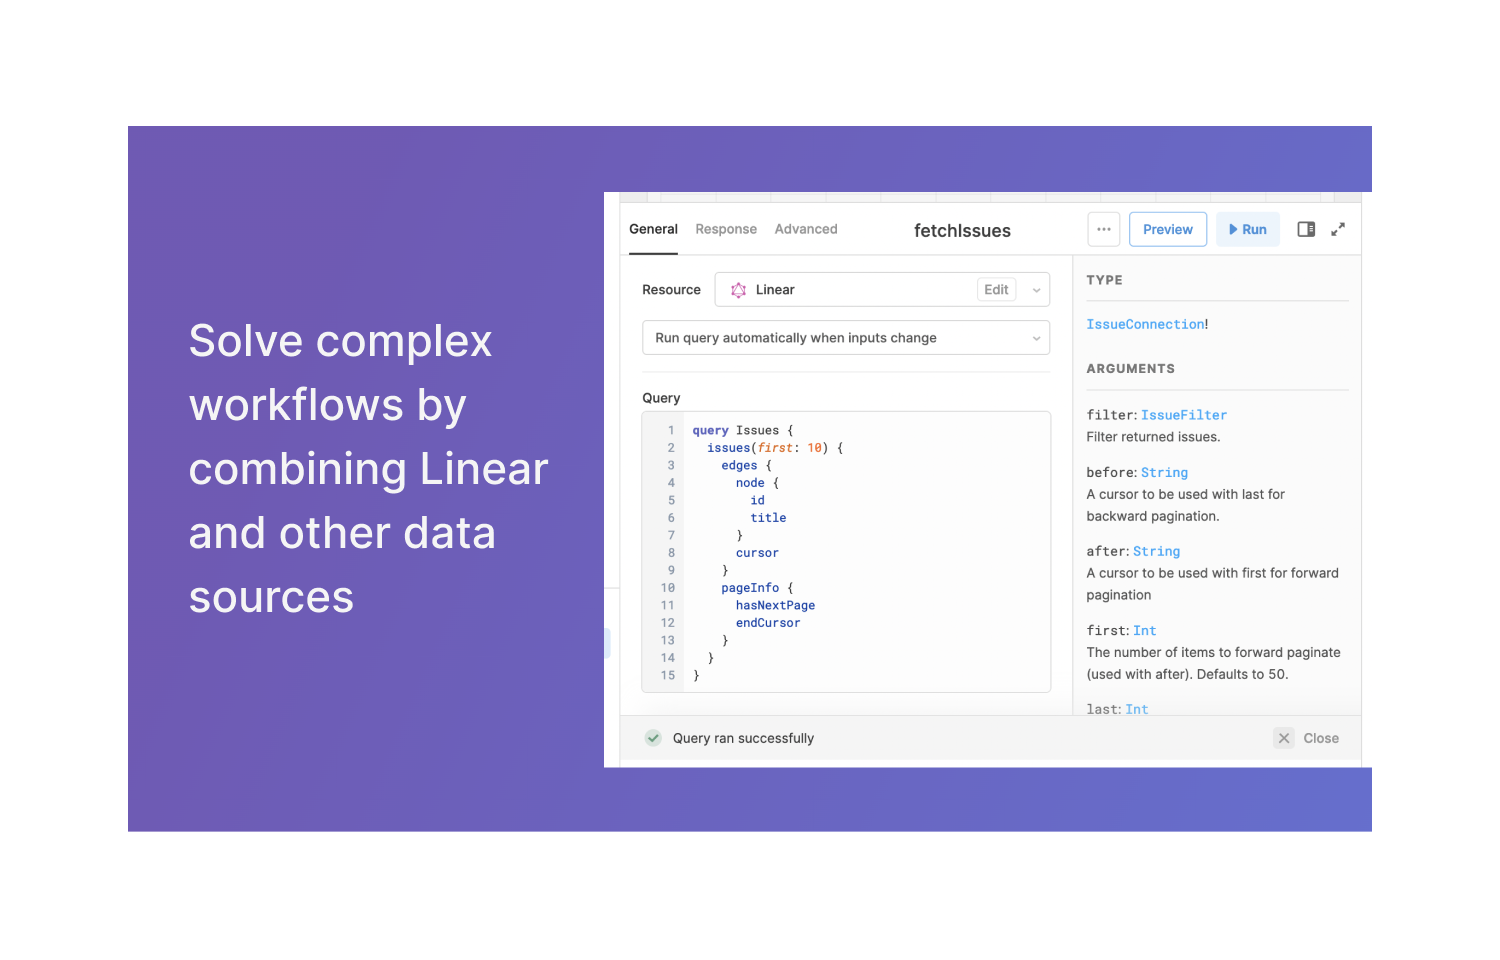 Solve complex workflows by combining Liner and other data sources